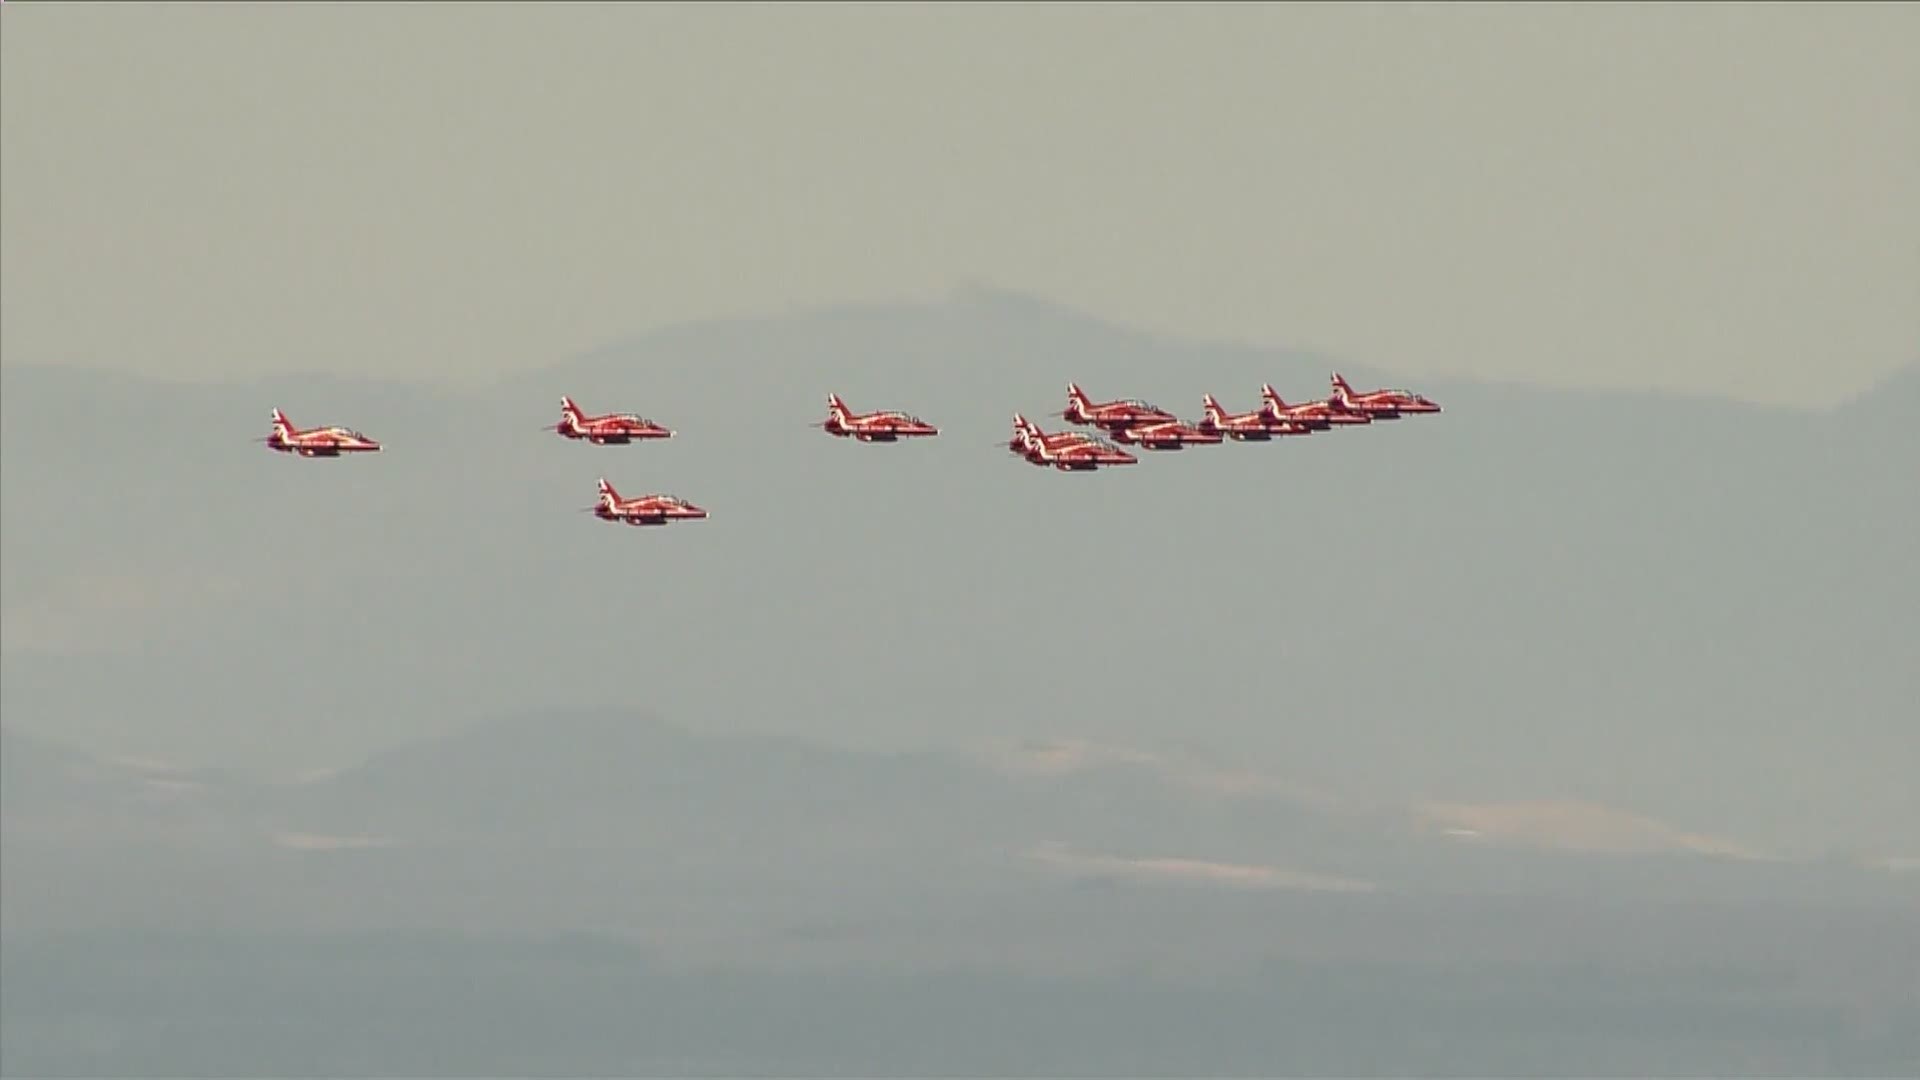 Flying distinctive Hawk jets, the Royal Air Force Aerobatic Team on Tuesday is making stops and performing fly-bys at the Rocky Mountain Metropolitan Airport and the U.S. Air Force Academy, according to a news release from the airport.